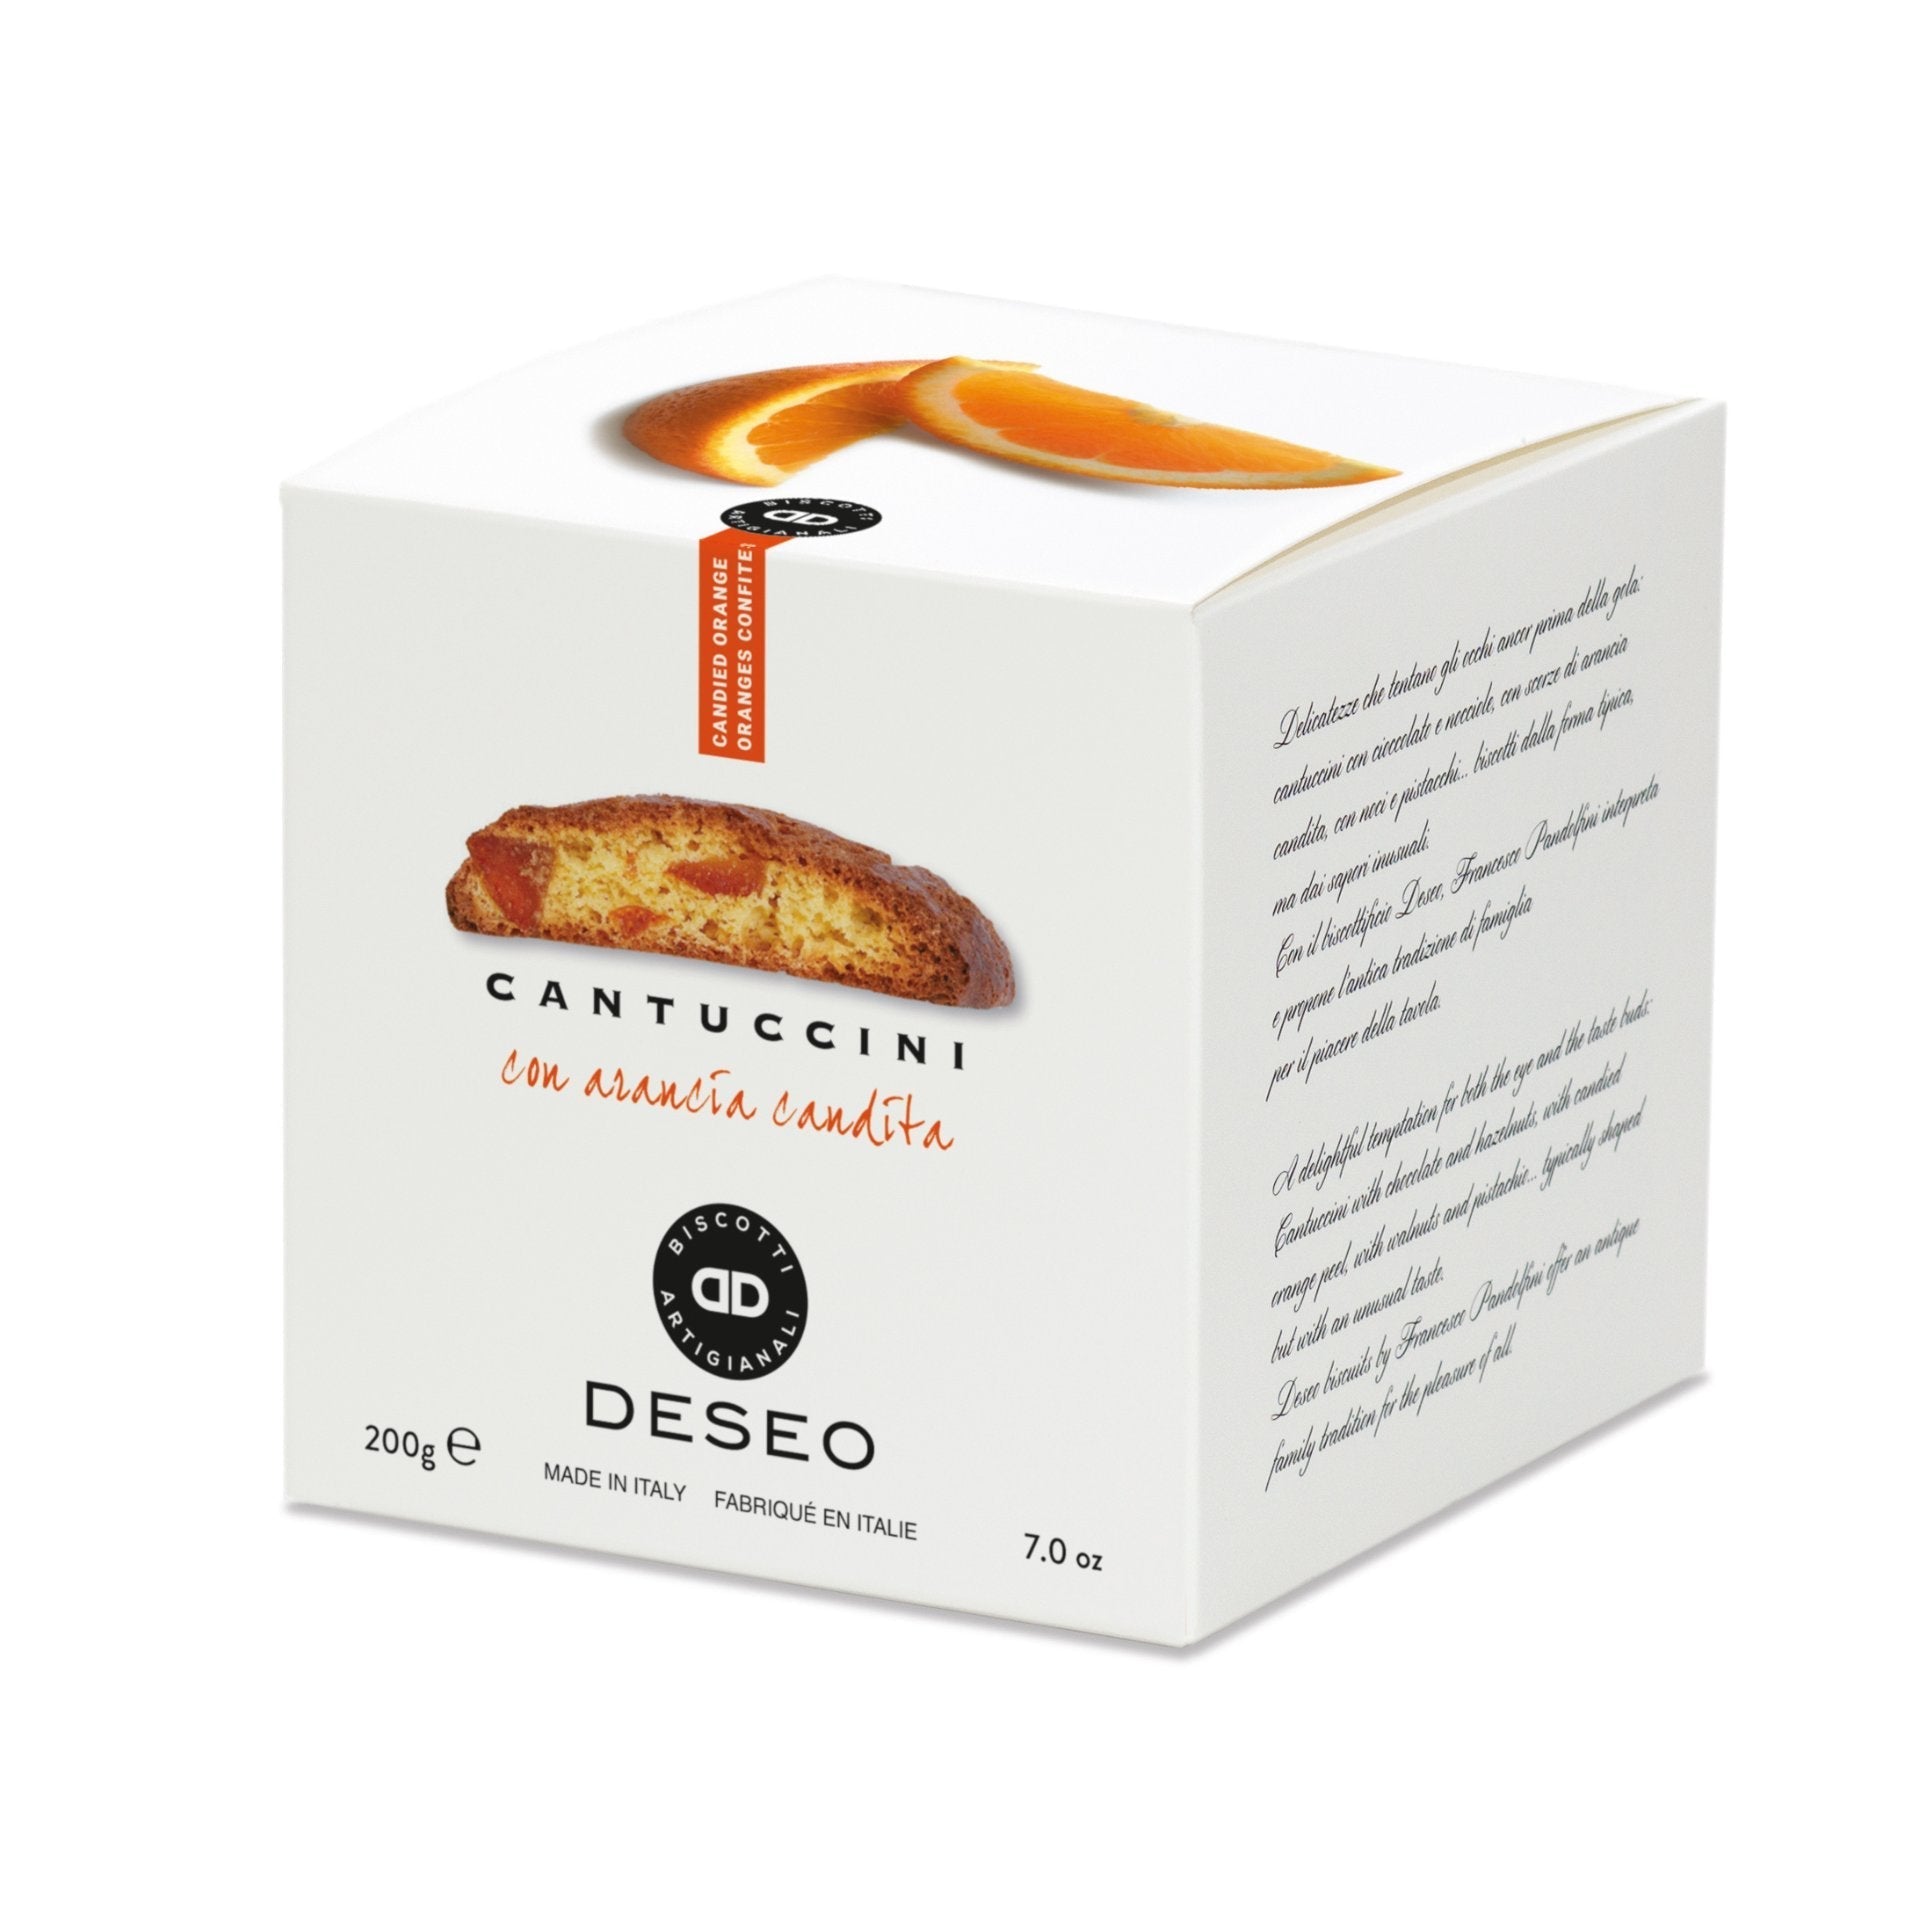 Deseo Cantuccini Toscani with Candied Orange 200g (Box)  | Imported and distributed in the UK by Just Gourmet Foods